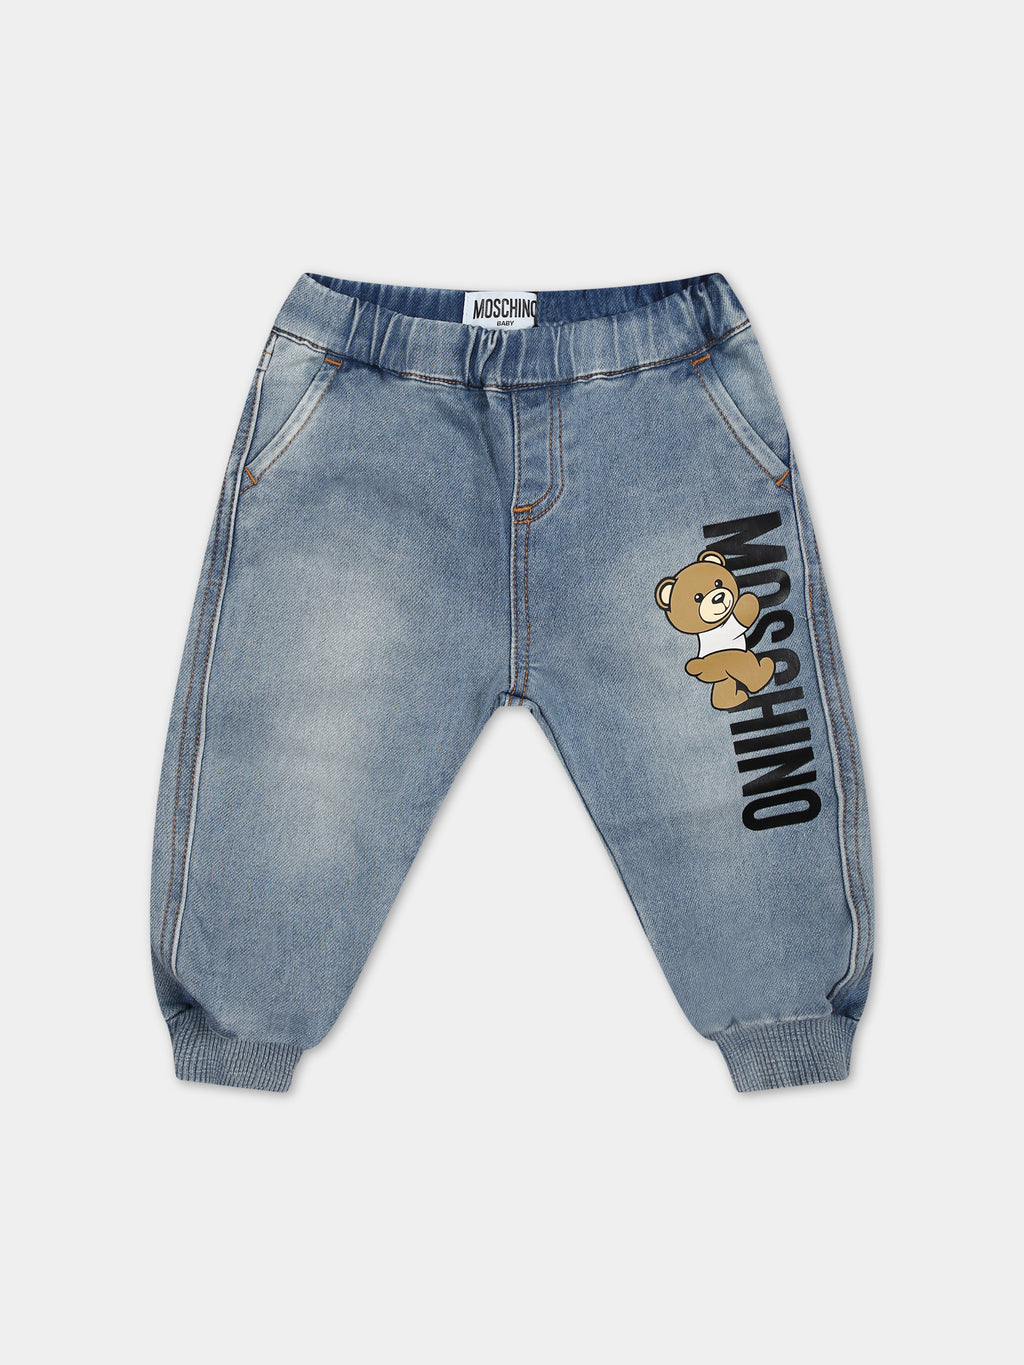 Denim jeans for baby boy with Teddy Bear and logo